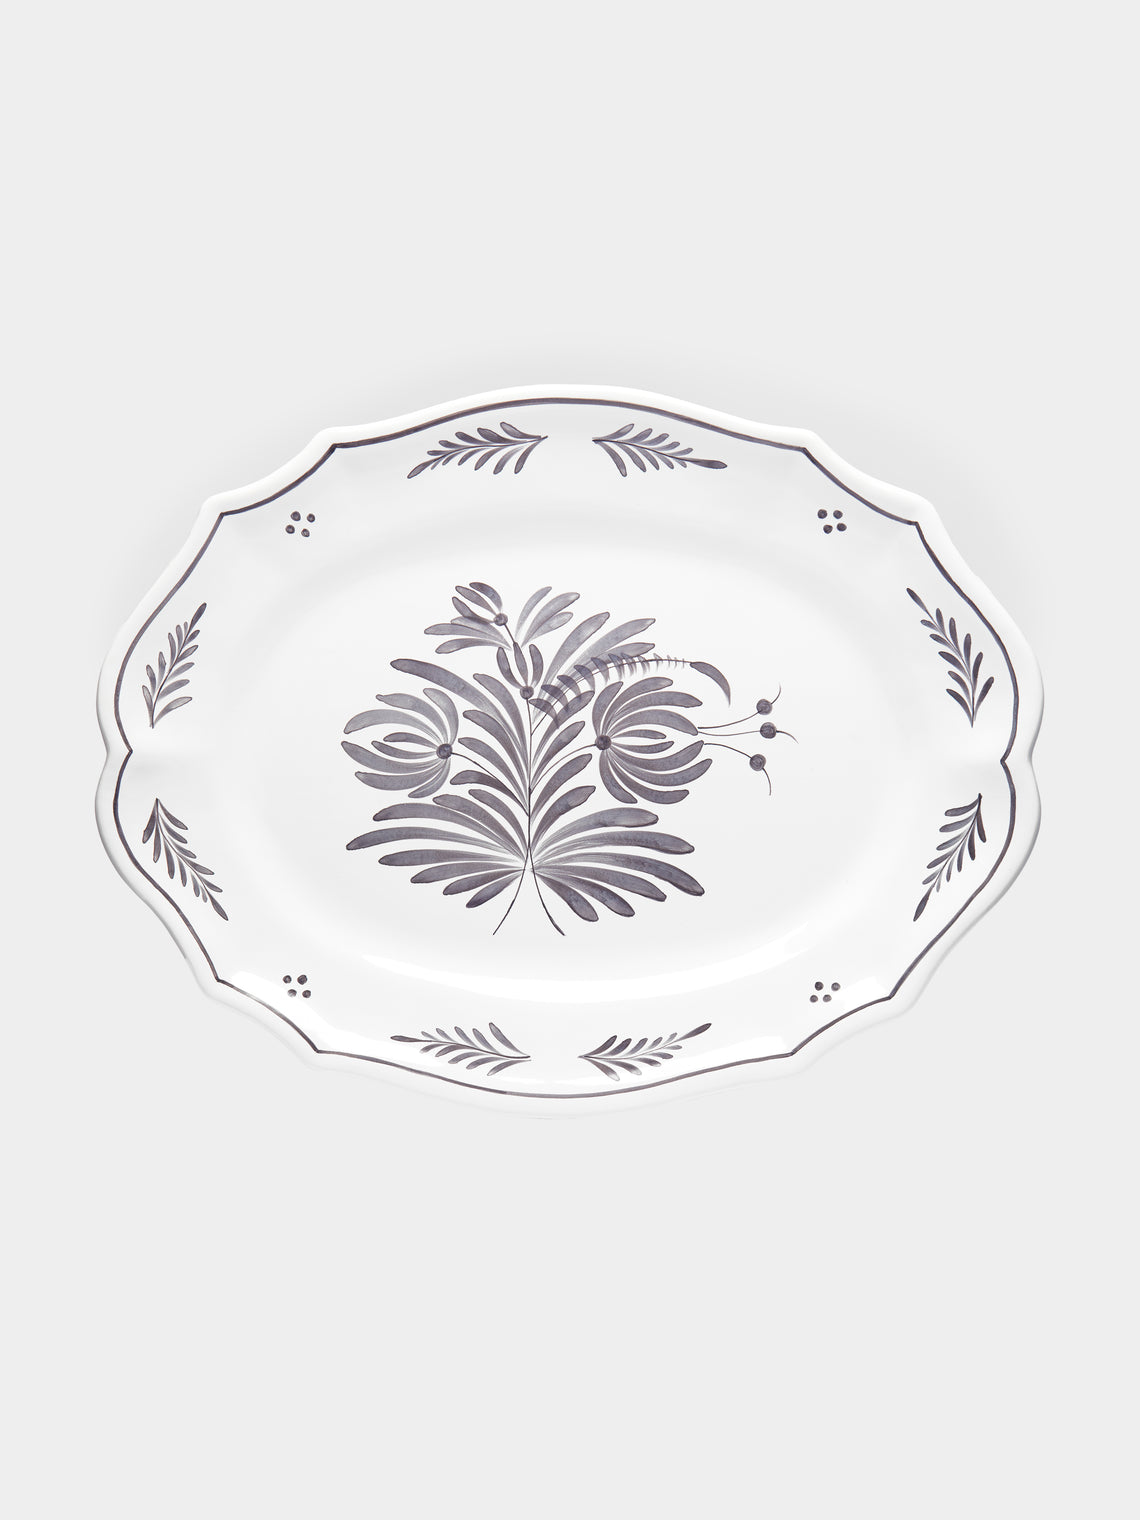 Bourg Joly Malicorne - Antique Fleurs Hand-Painted Ceramic Large Oval Serving Dish -  - ABASK - 